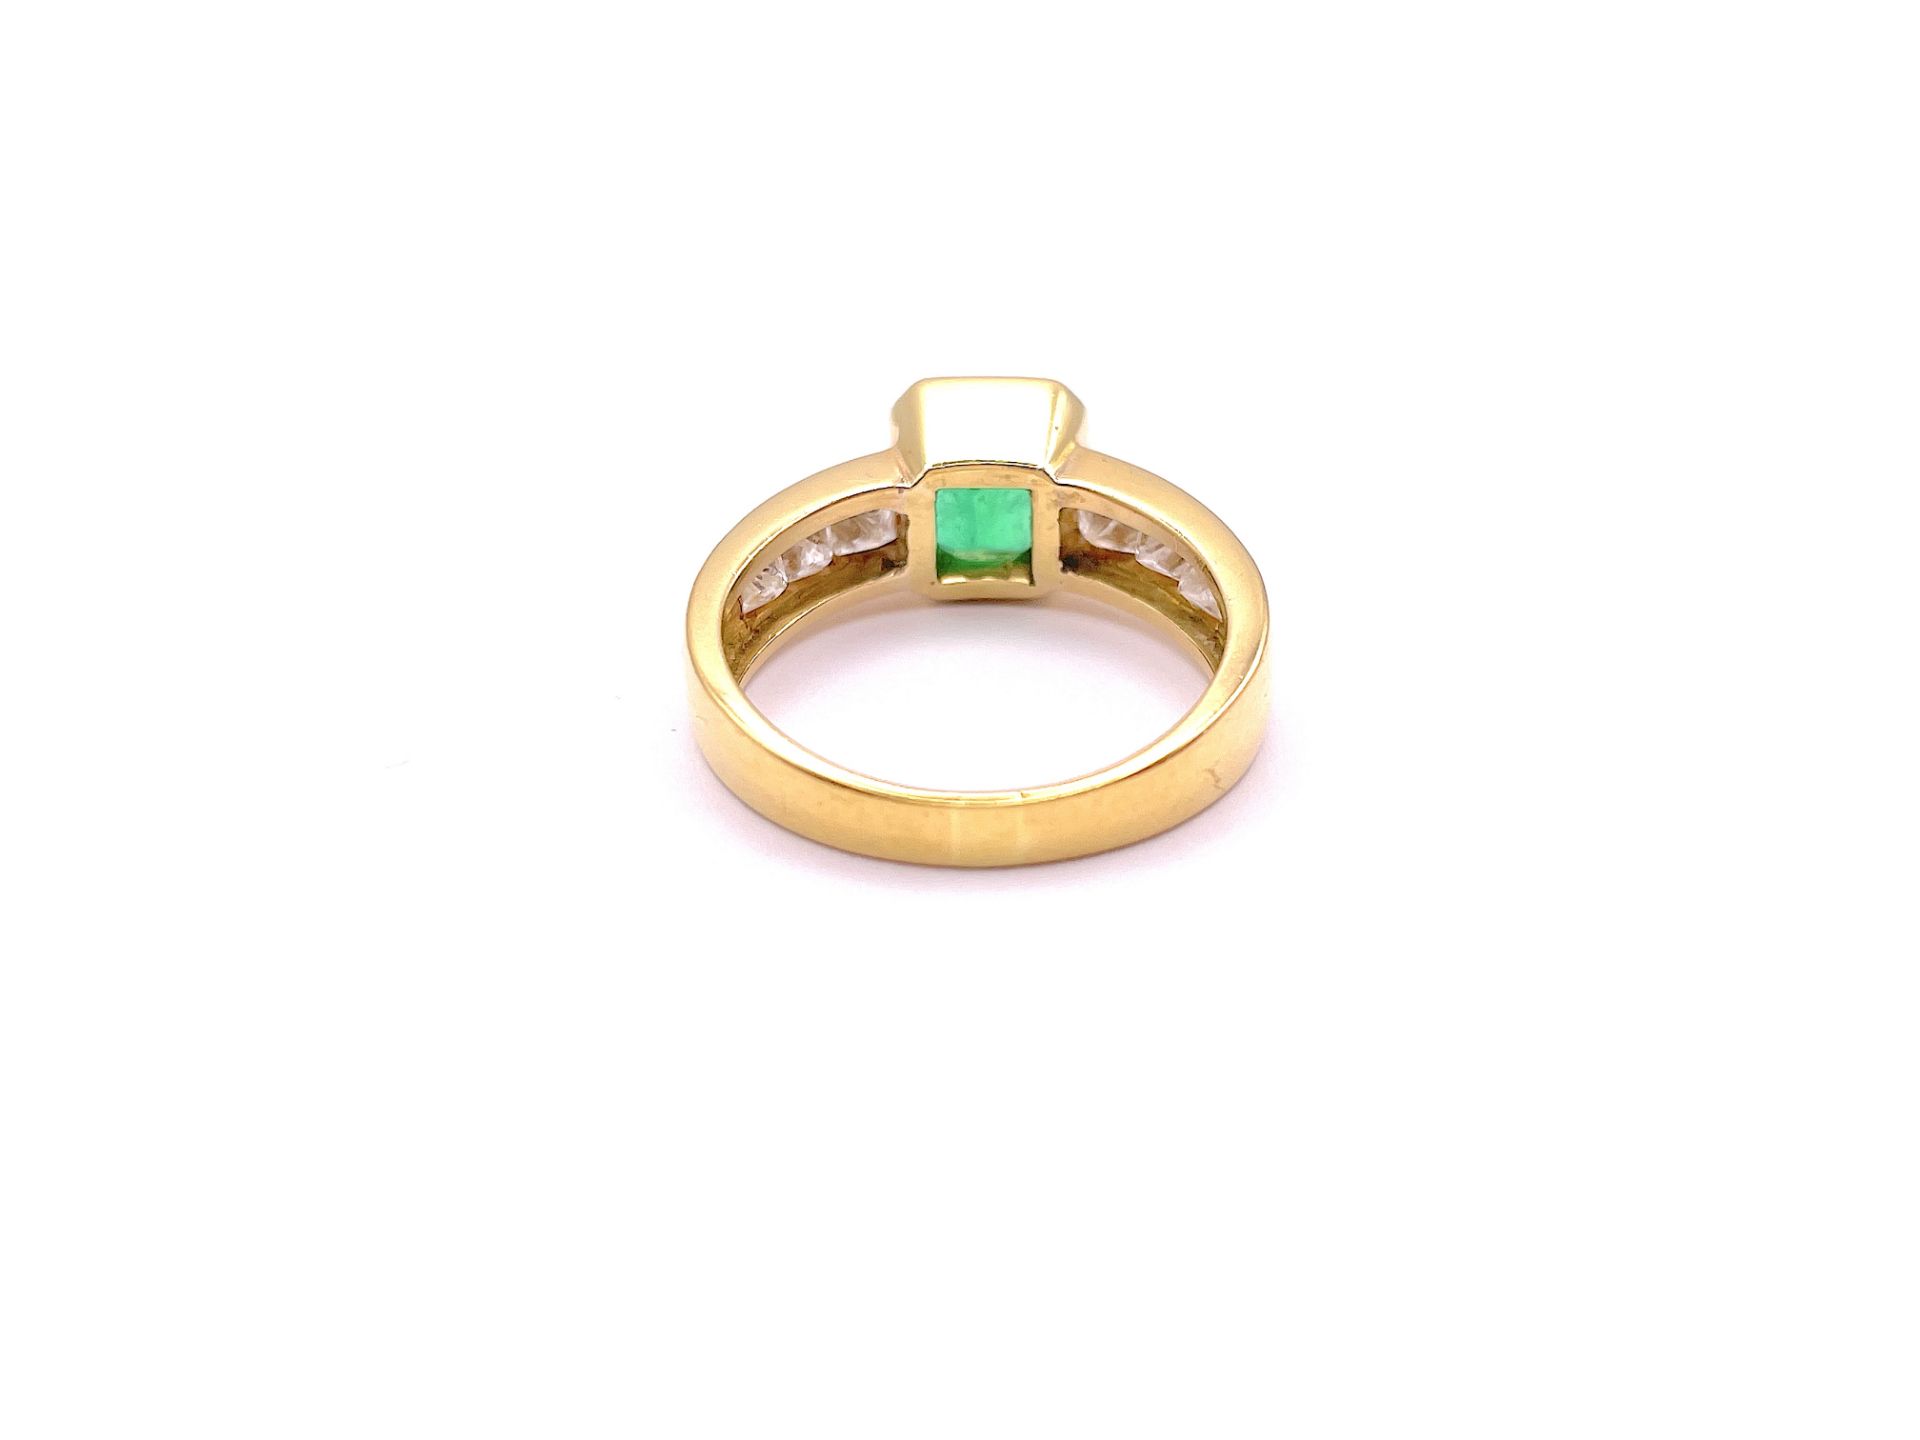 Emerald ring - Image 3 of 5